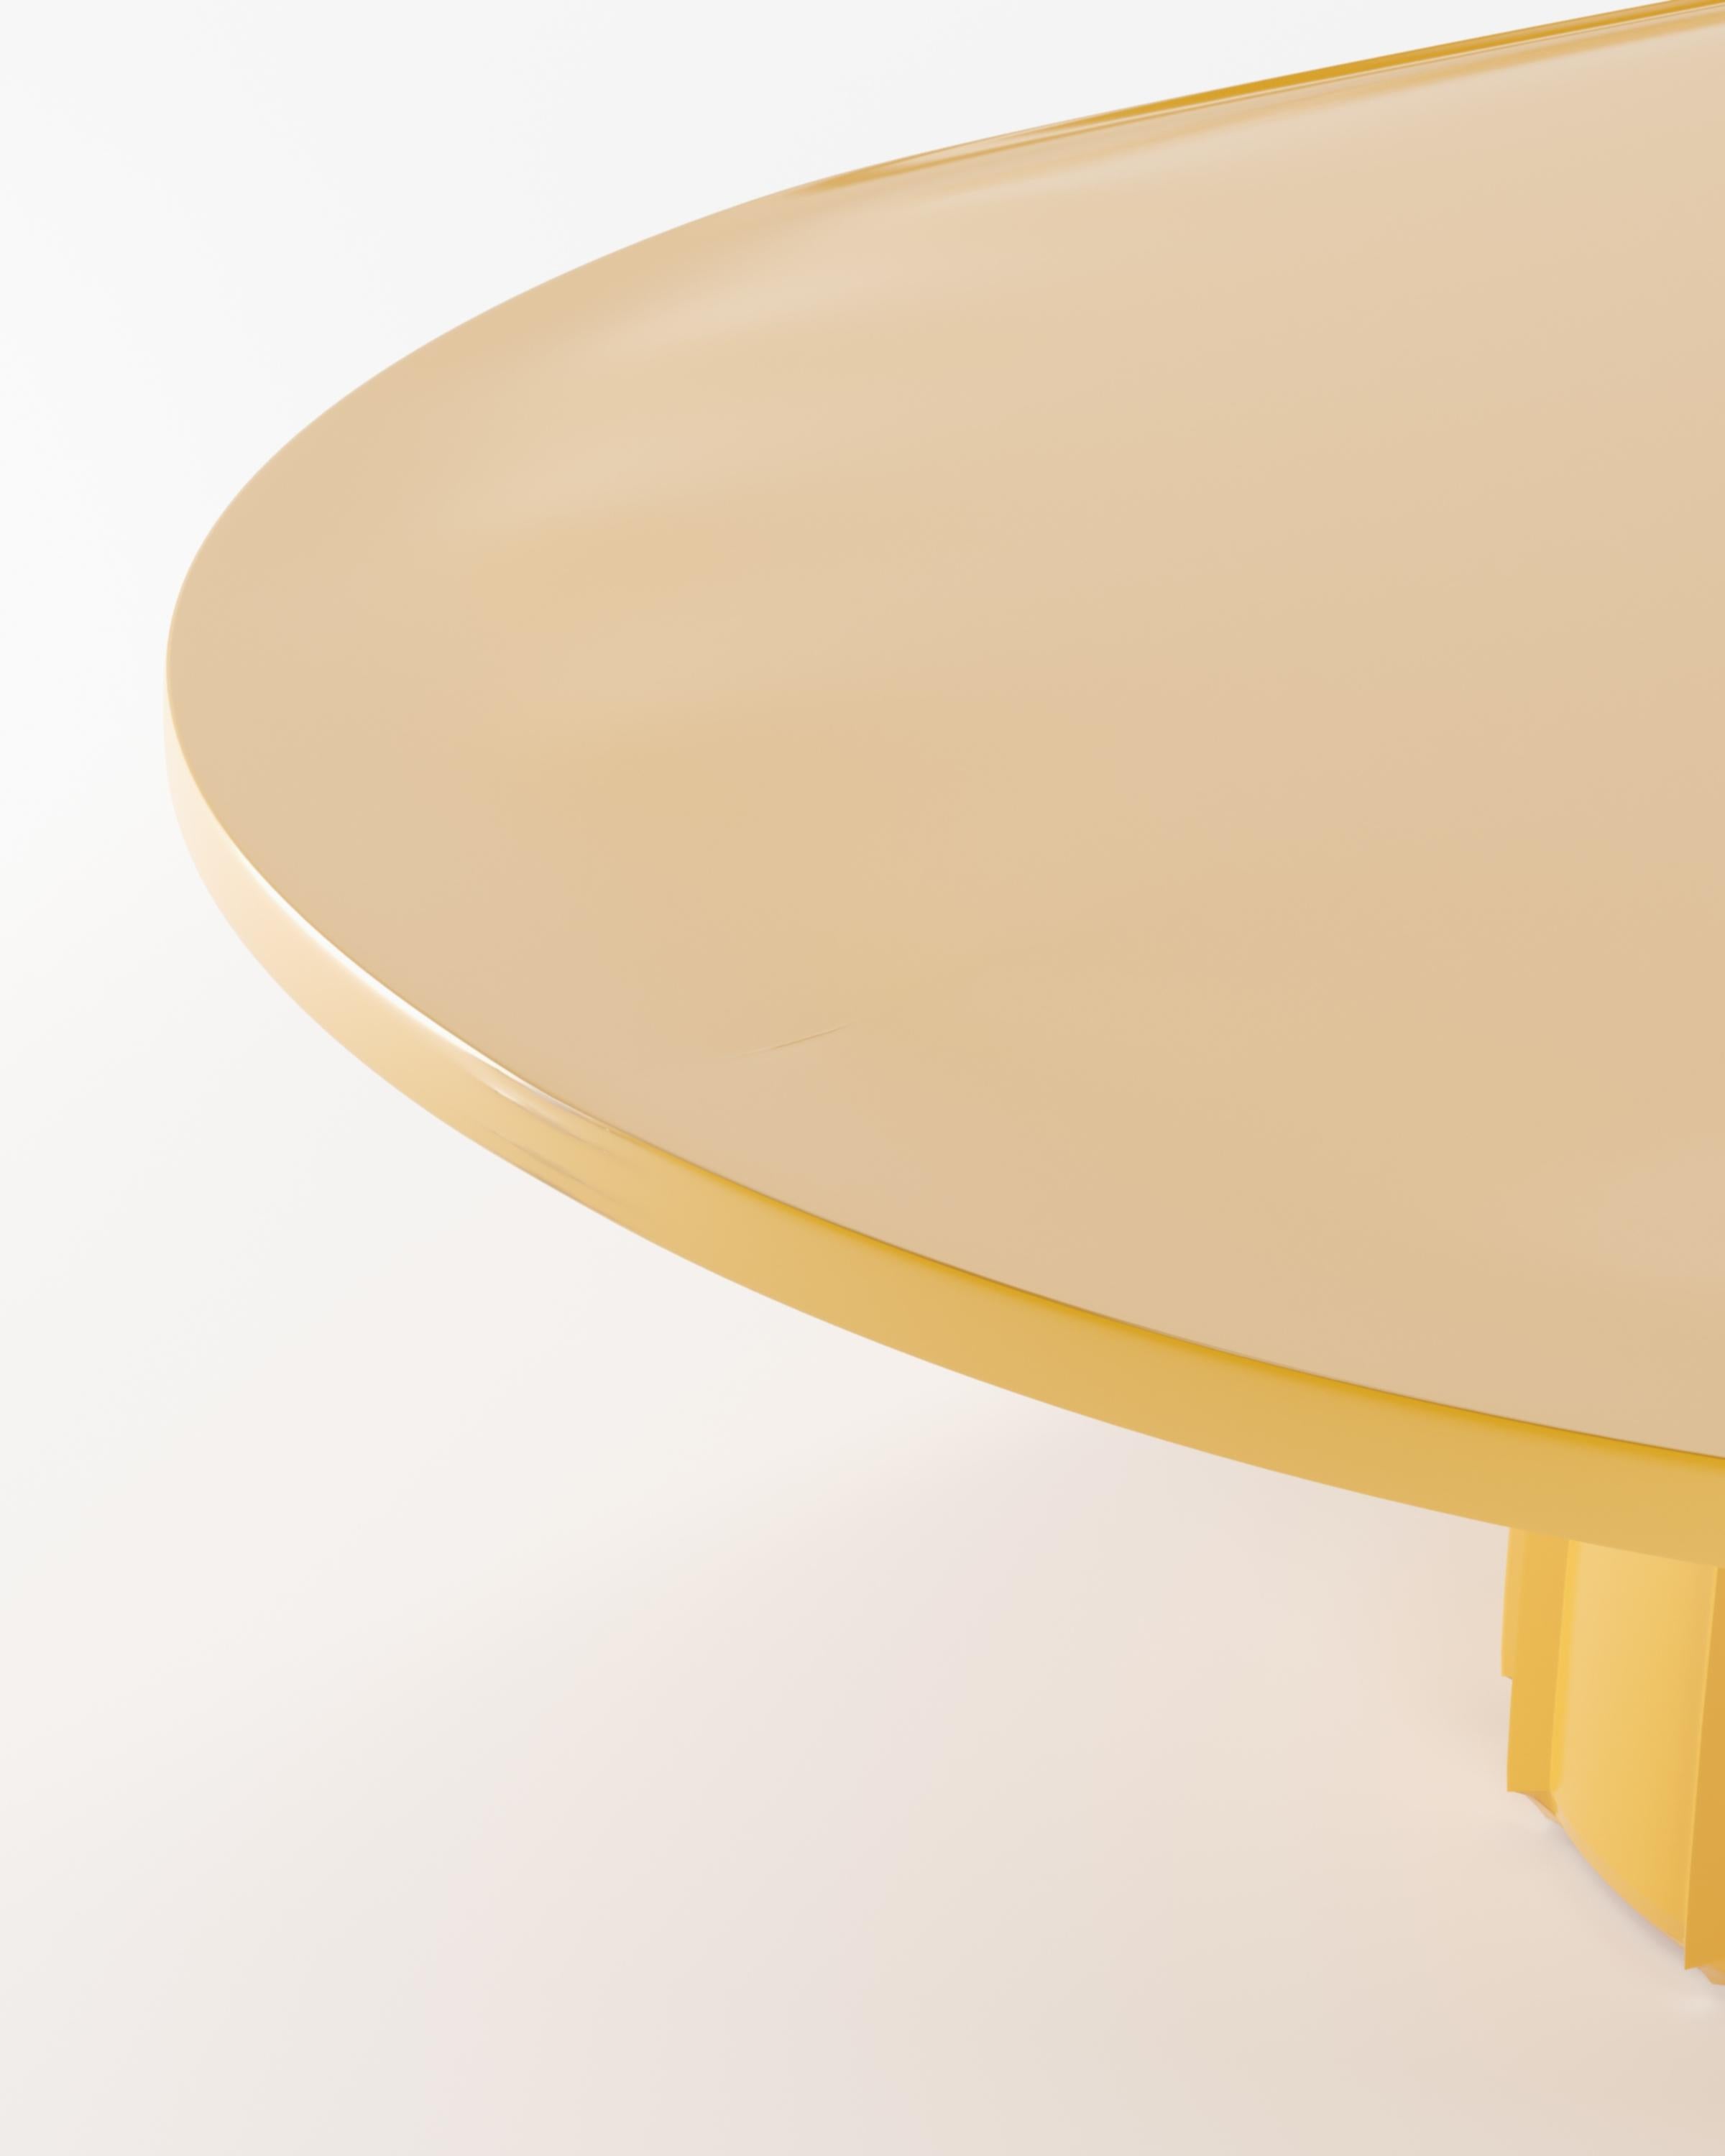 Collector- 21st Century Designed by Alter Ego Djembe Center Table Lacquered RAL 1005


DIMENSIONS:
W 180 cm  70,8”
D 70 cm  27,5”
H 31 cm  12,2”


PRODUCT FEATURES
Oak

PRODUCT OPTIONS
Available in all COLLECTOR wood swatches
Available to be